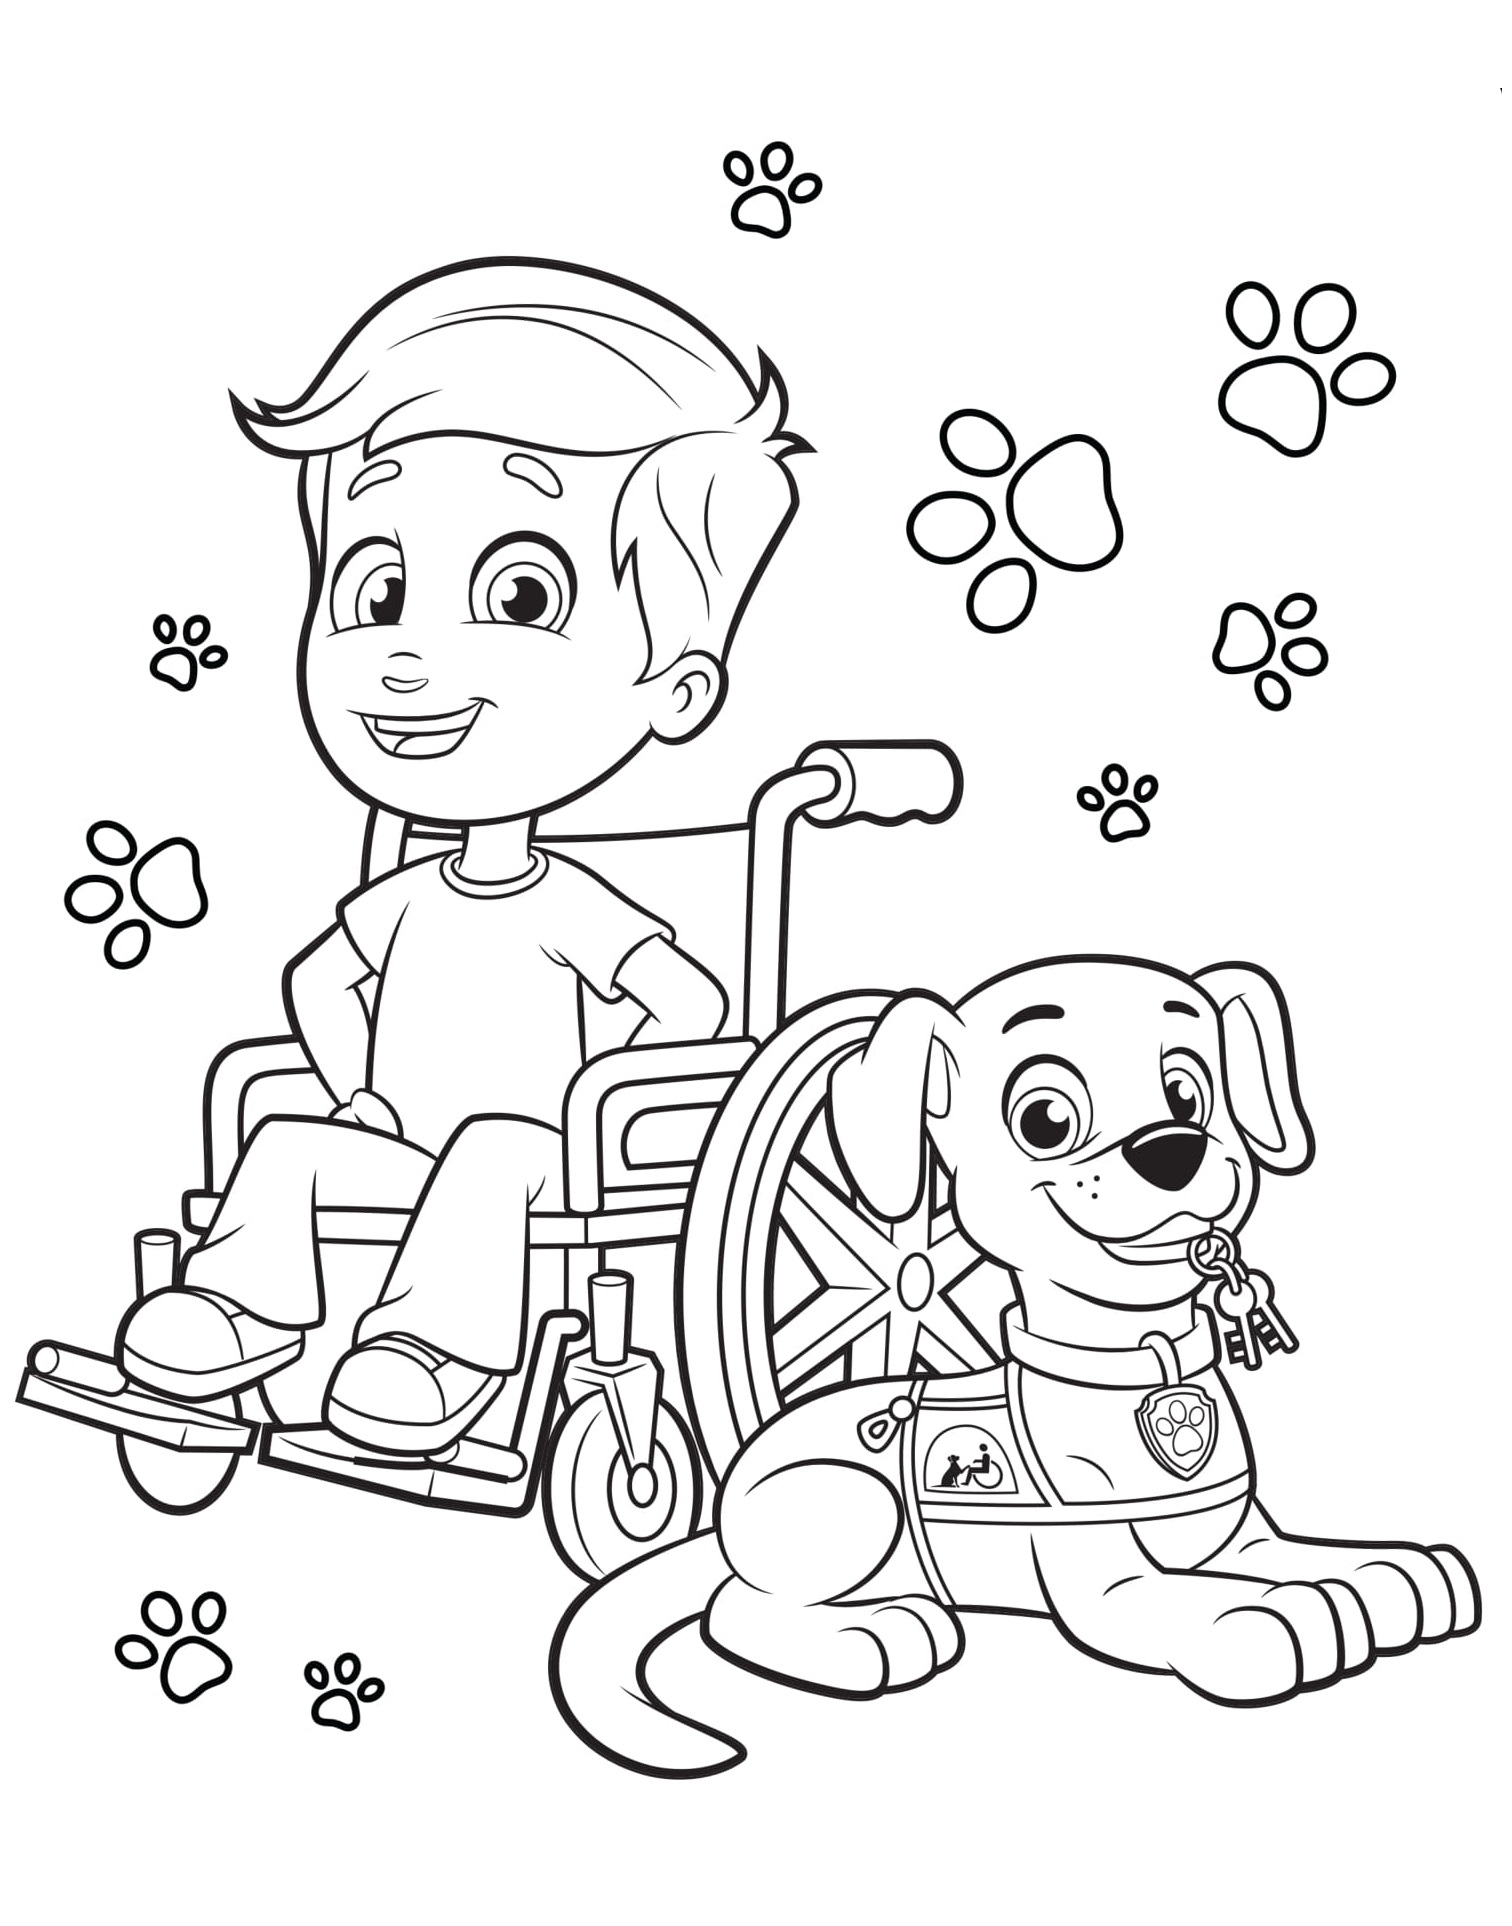 Canine Companions For Independence Dog And Kid Coloring Page